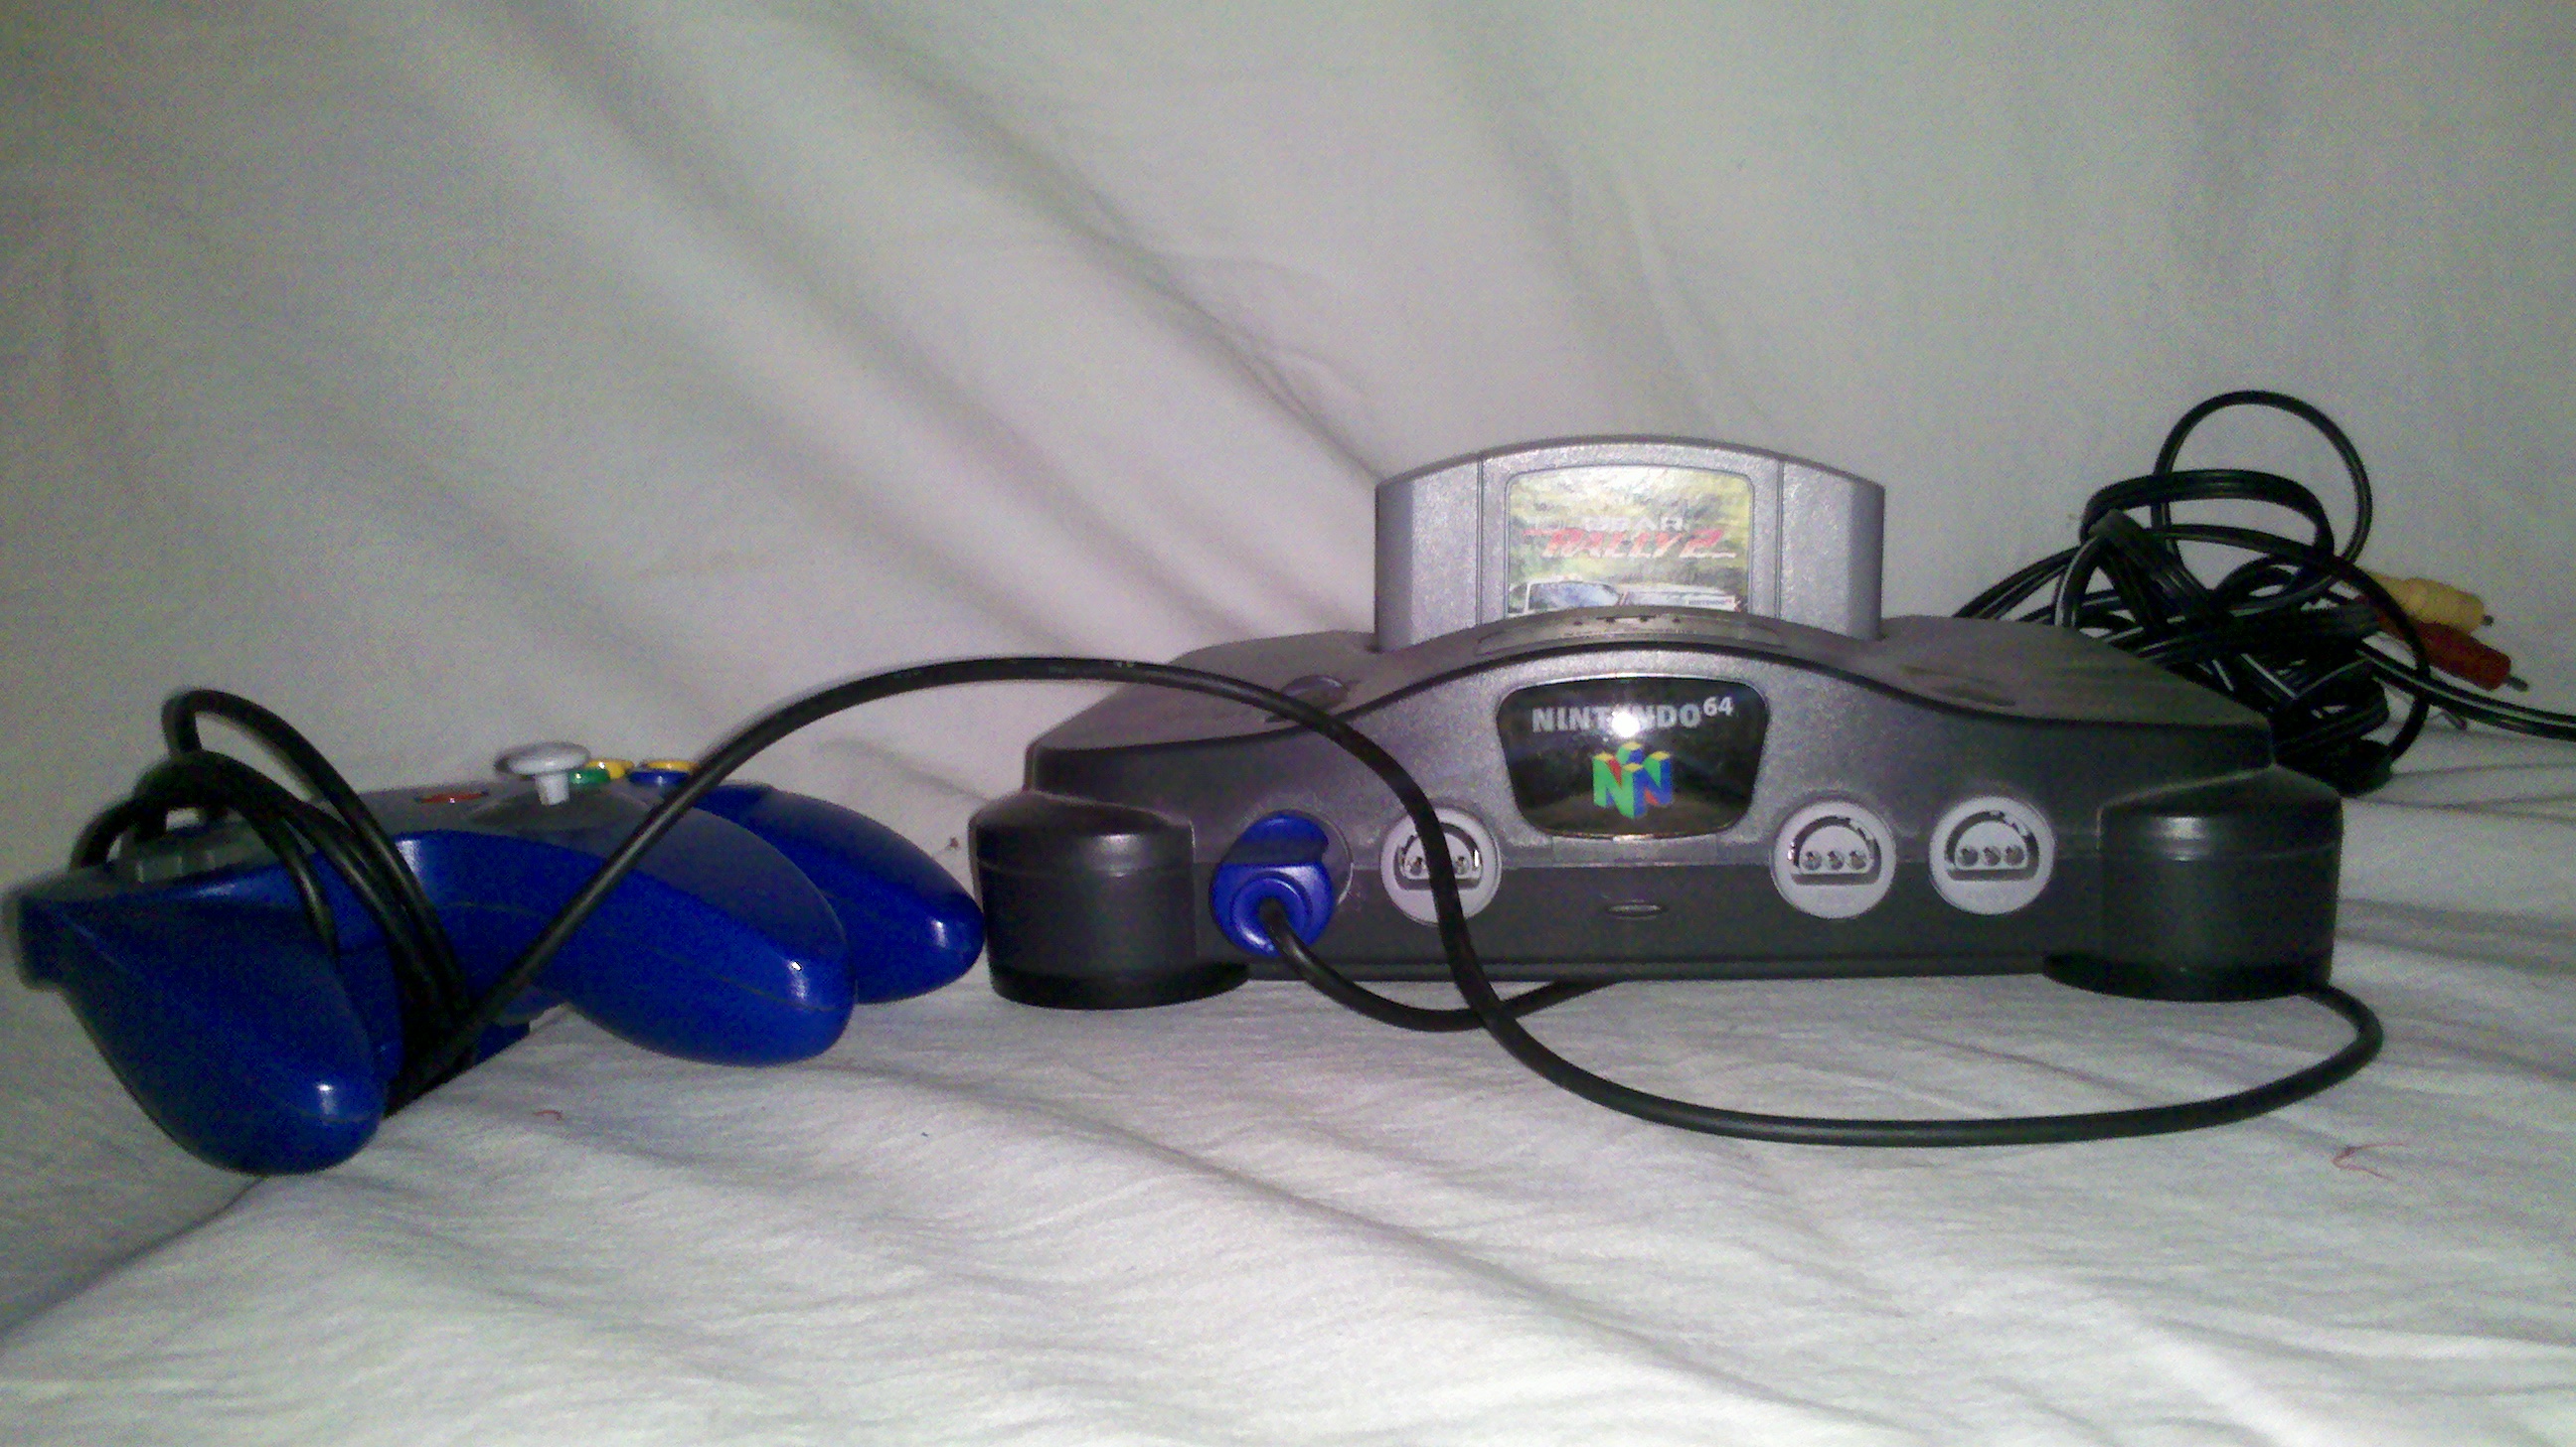 Nintendo 64 and 10 games